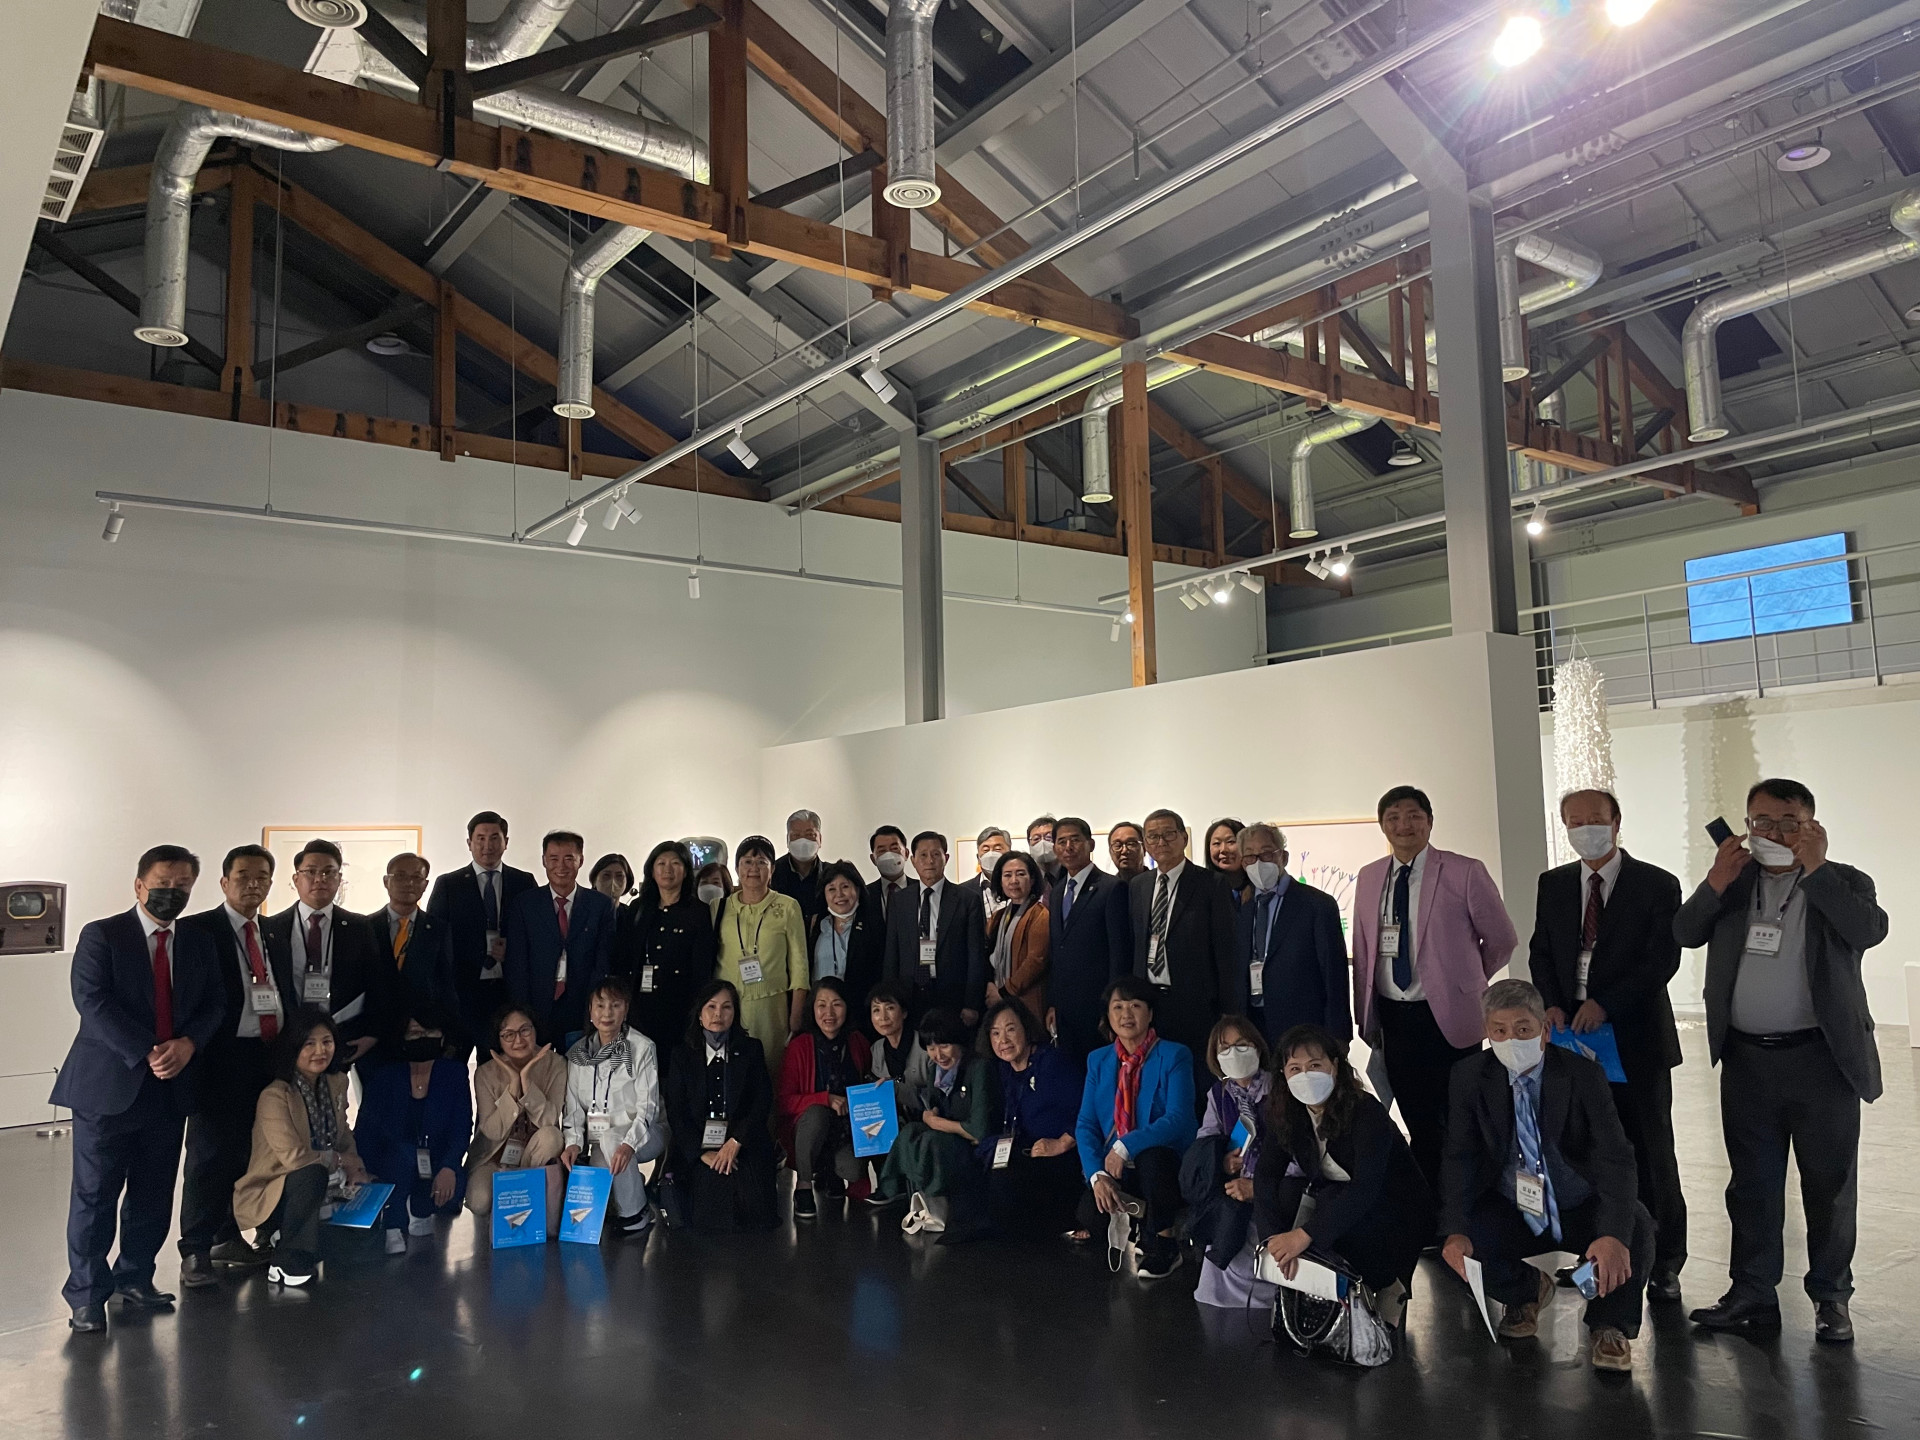 [Day 3] Korean community leaders taking a tour of the Korean emigration history